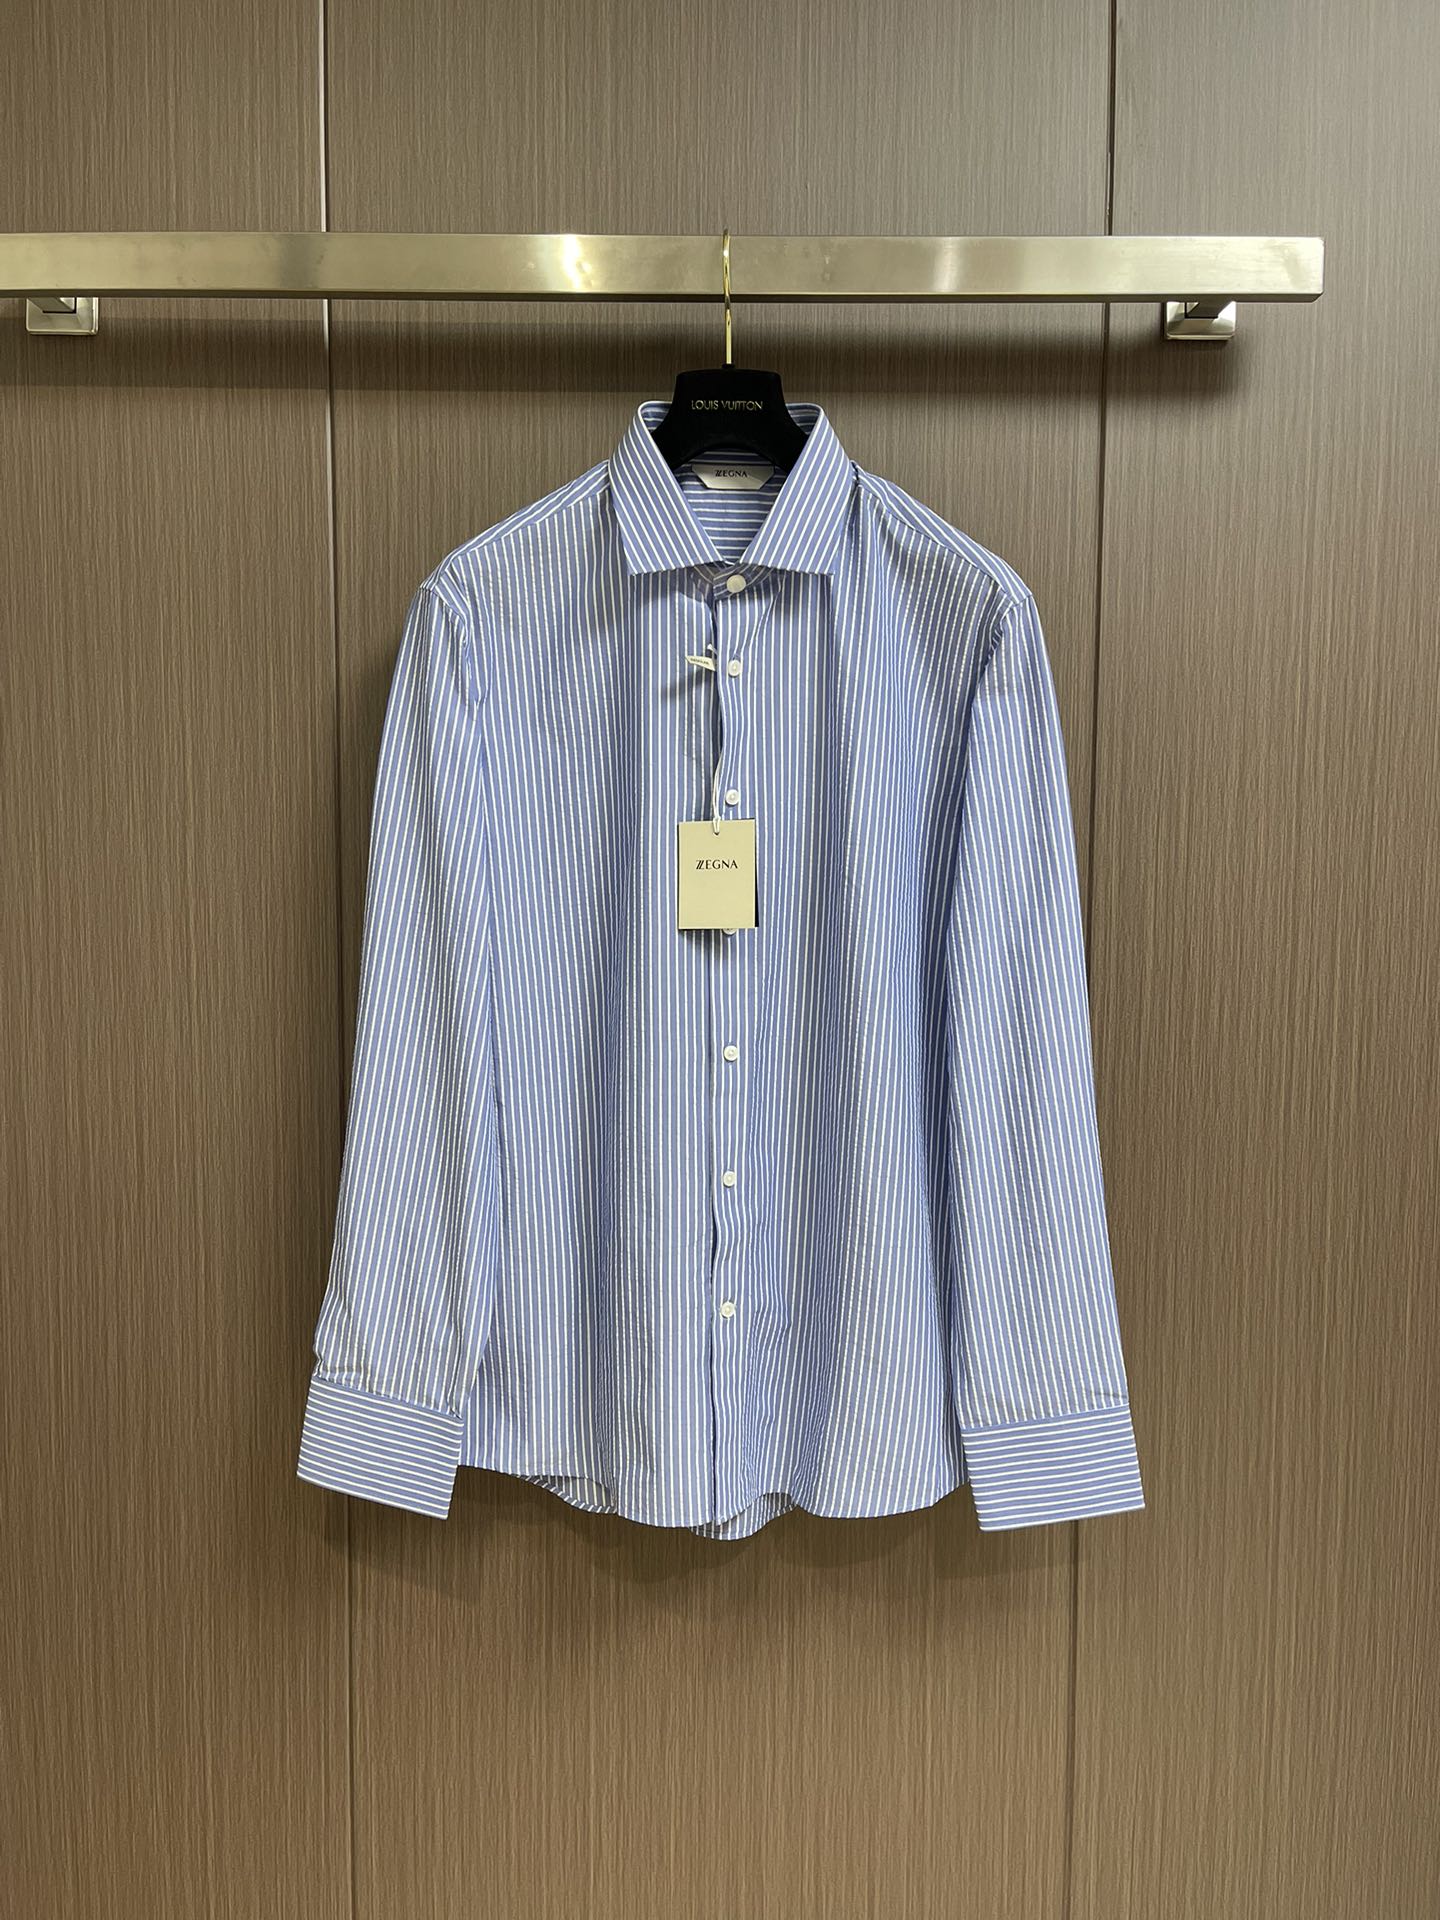 Zegna Clothing Shirts & Blouses Men Cotton Fall Collection